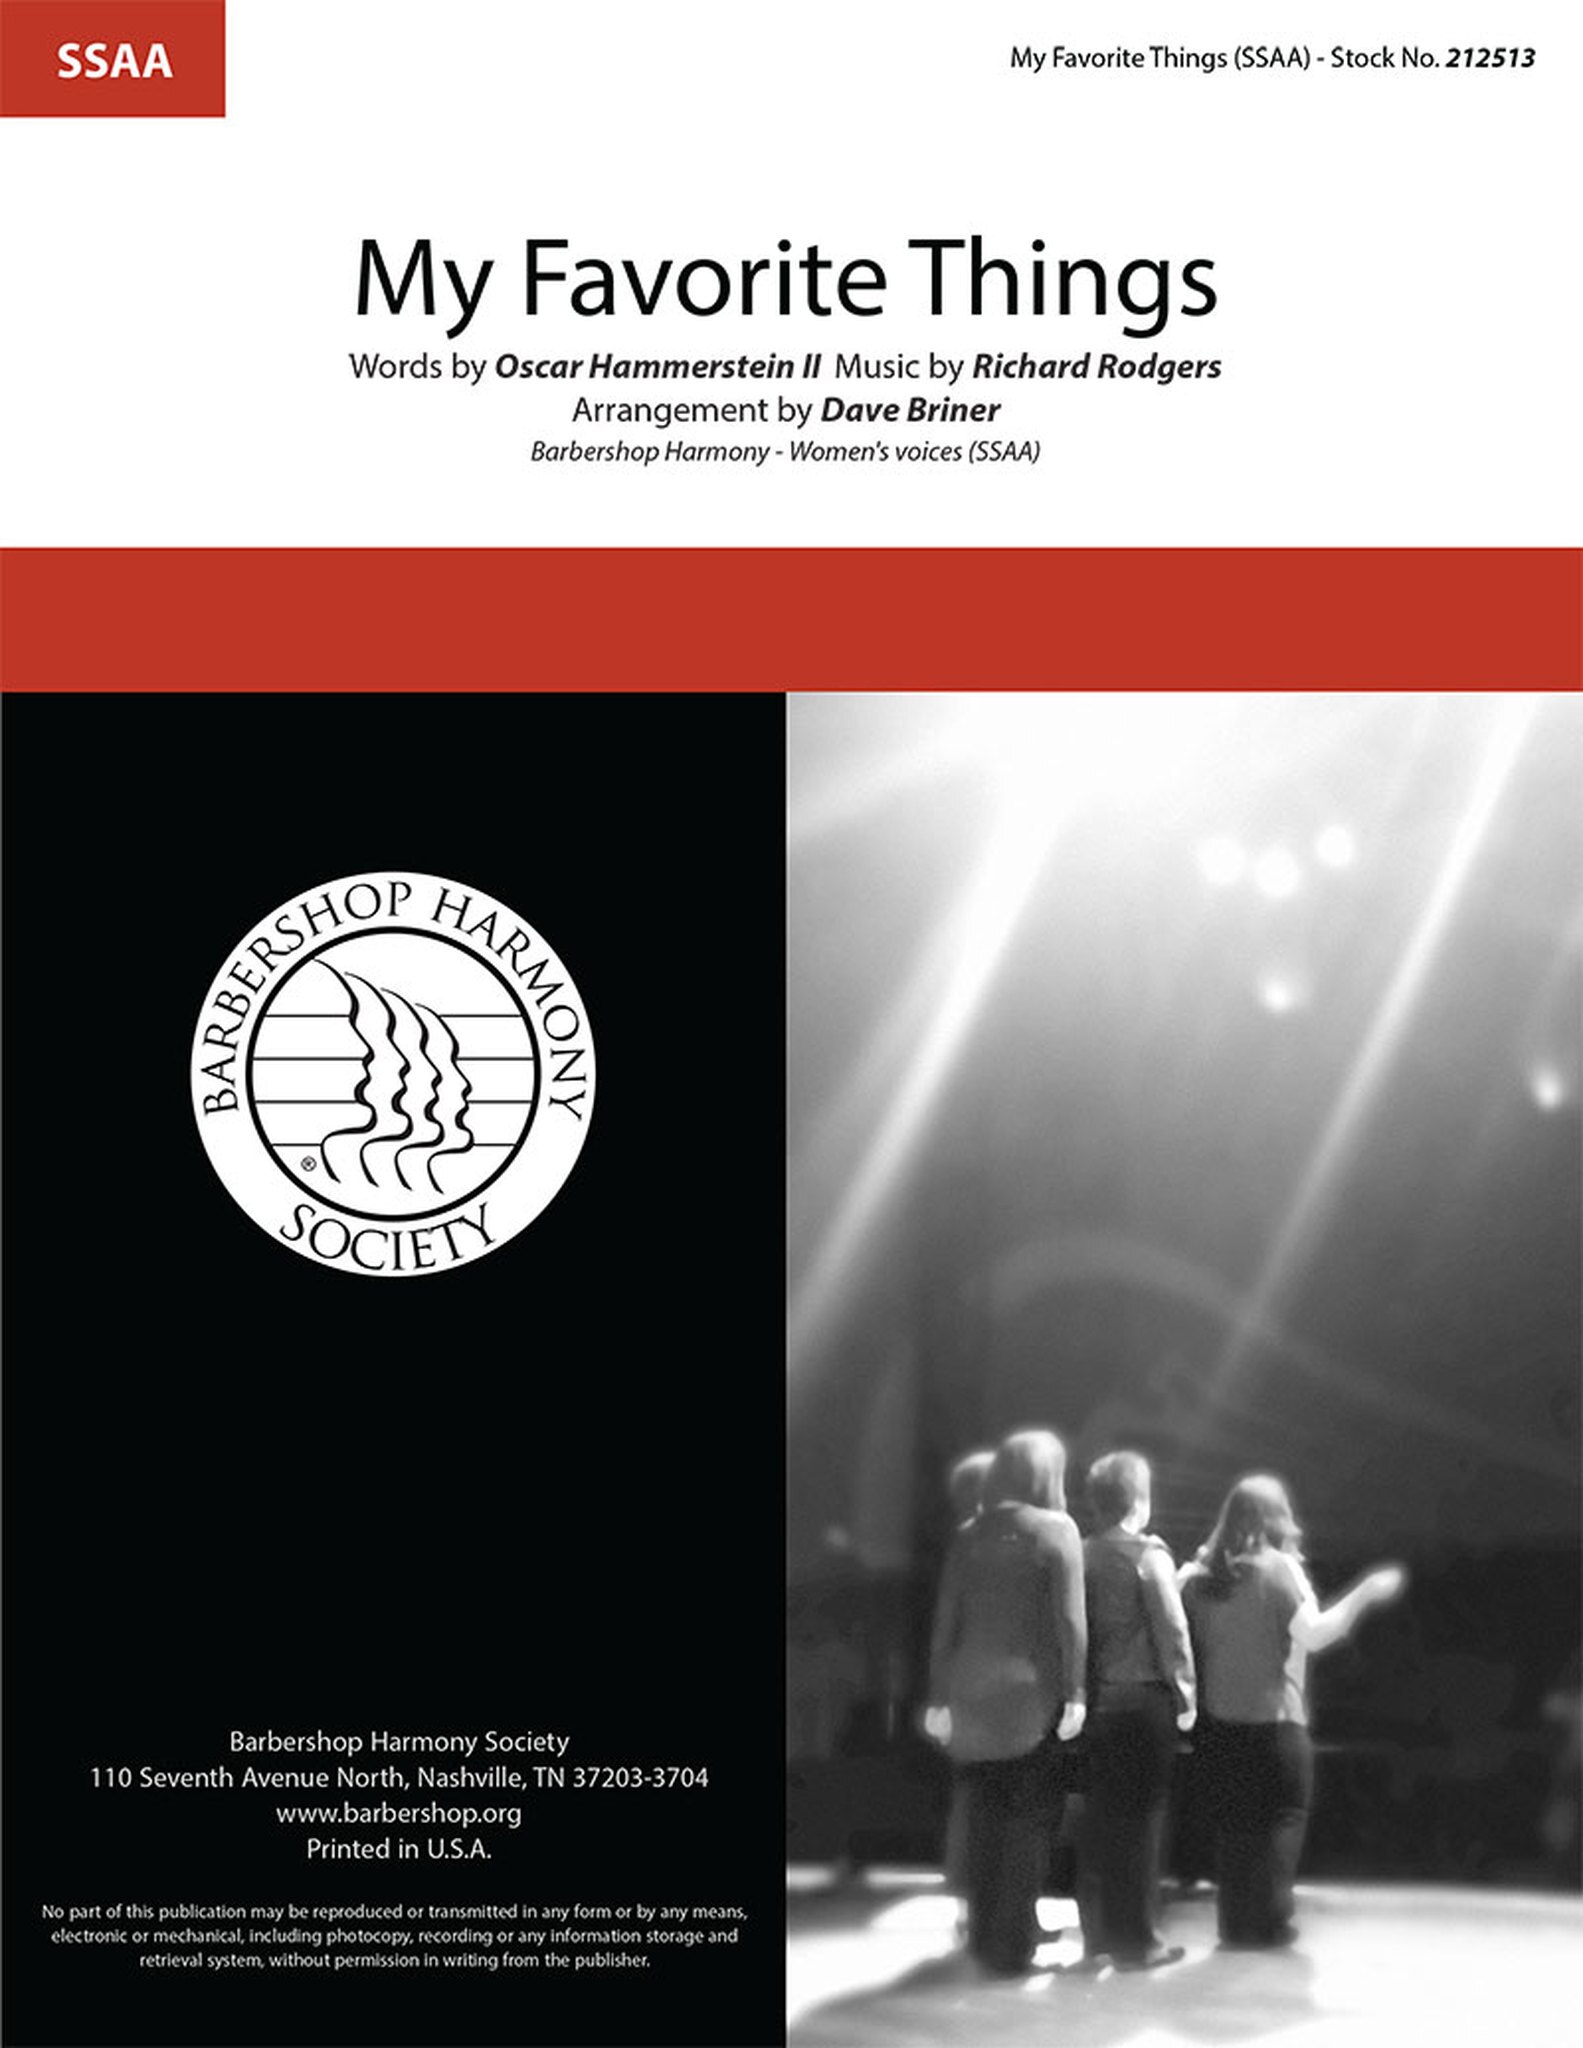 My Favorite Things : SSAA : Dave Briner : Richard Rodgers : The Sound Of Music : Songbook : 212513